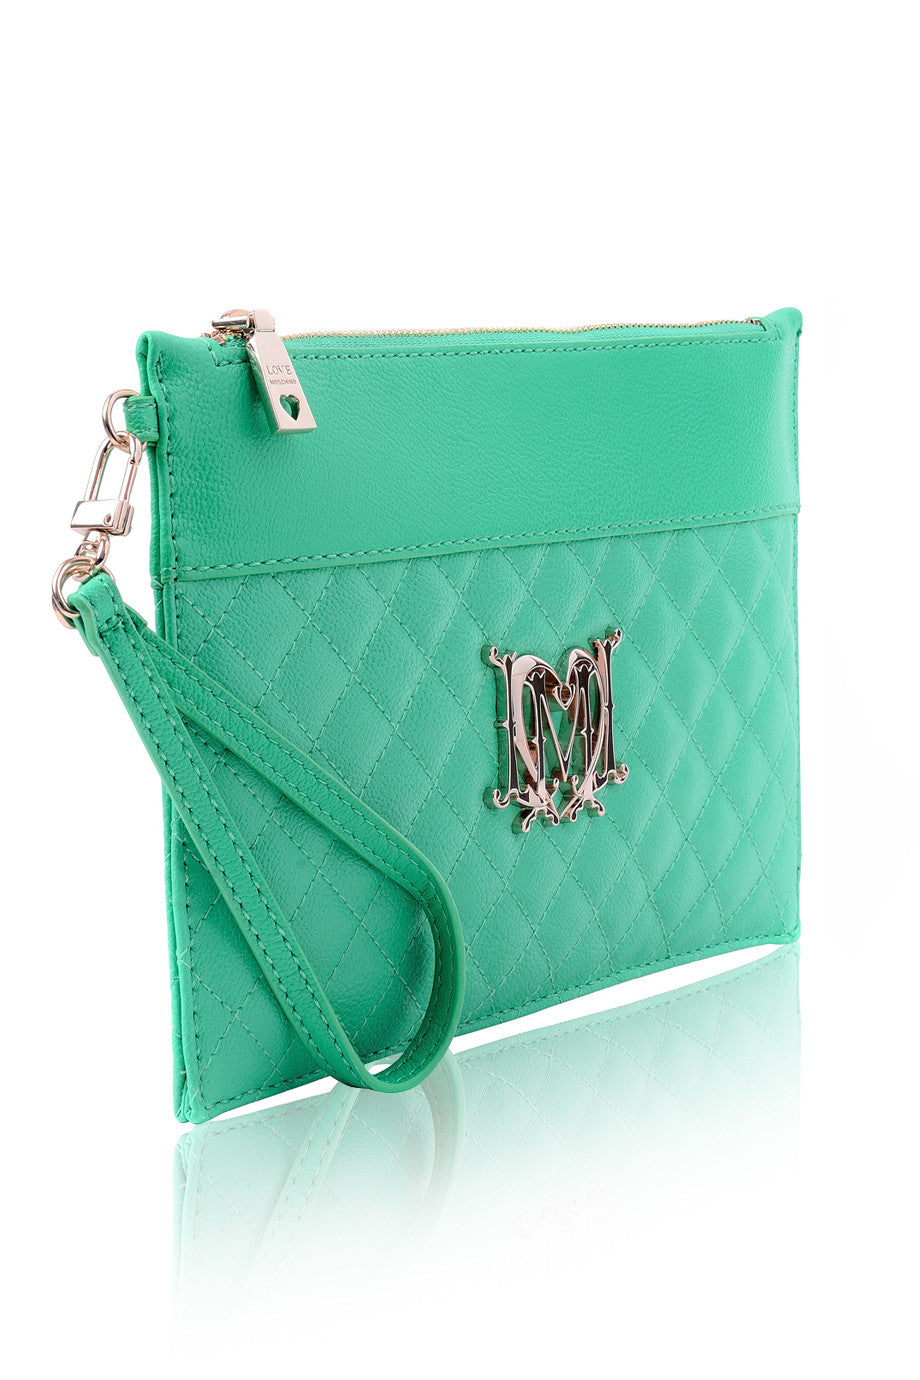 LOVE MOSCHINO MONOGRAM Mint Quilted Clutch – PRET-A-BEAUTE